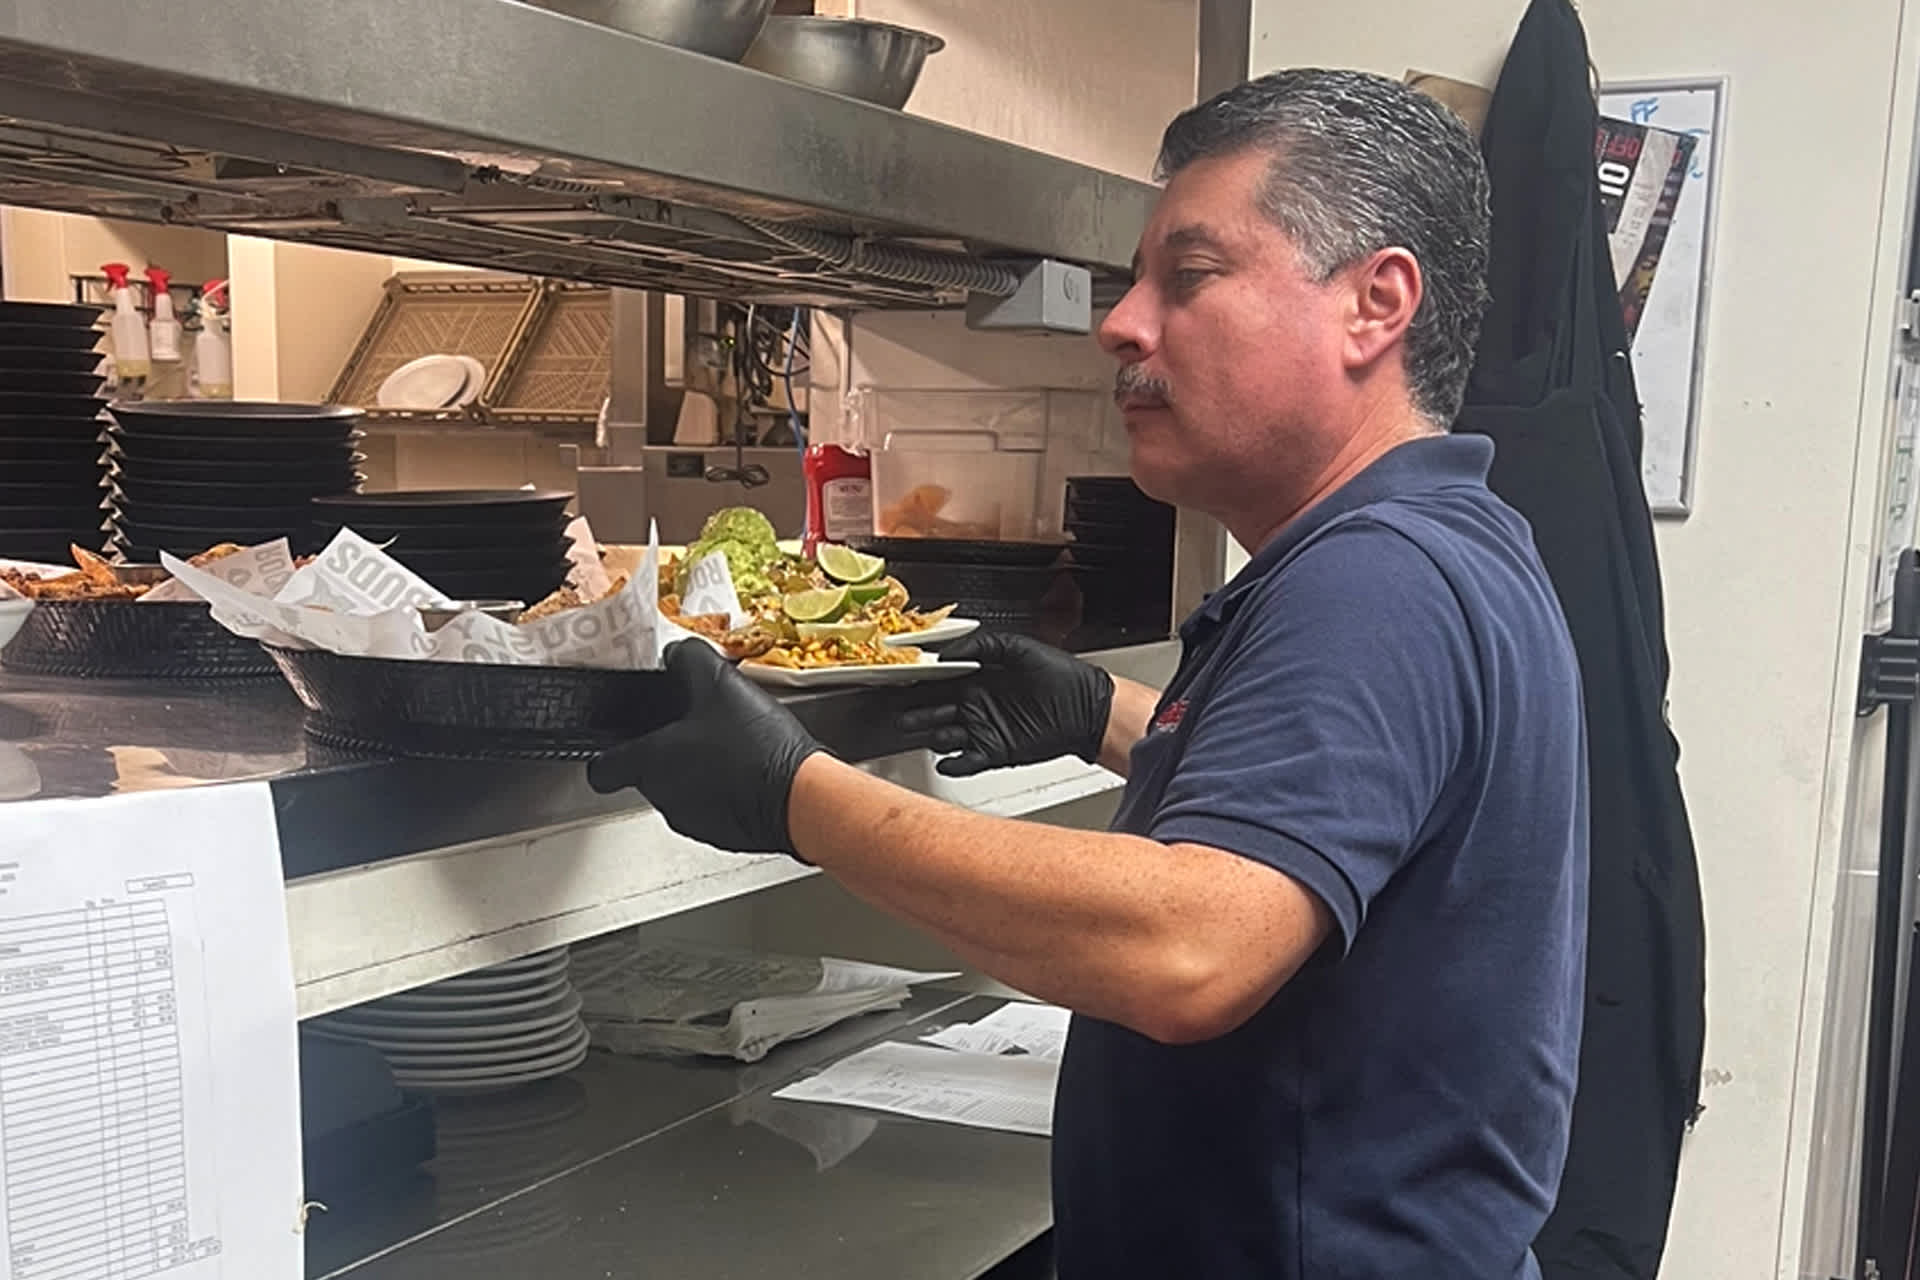 A server picks up an order from the kitchen.